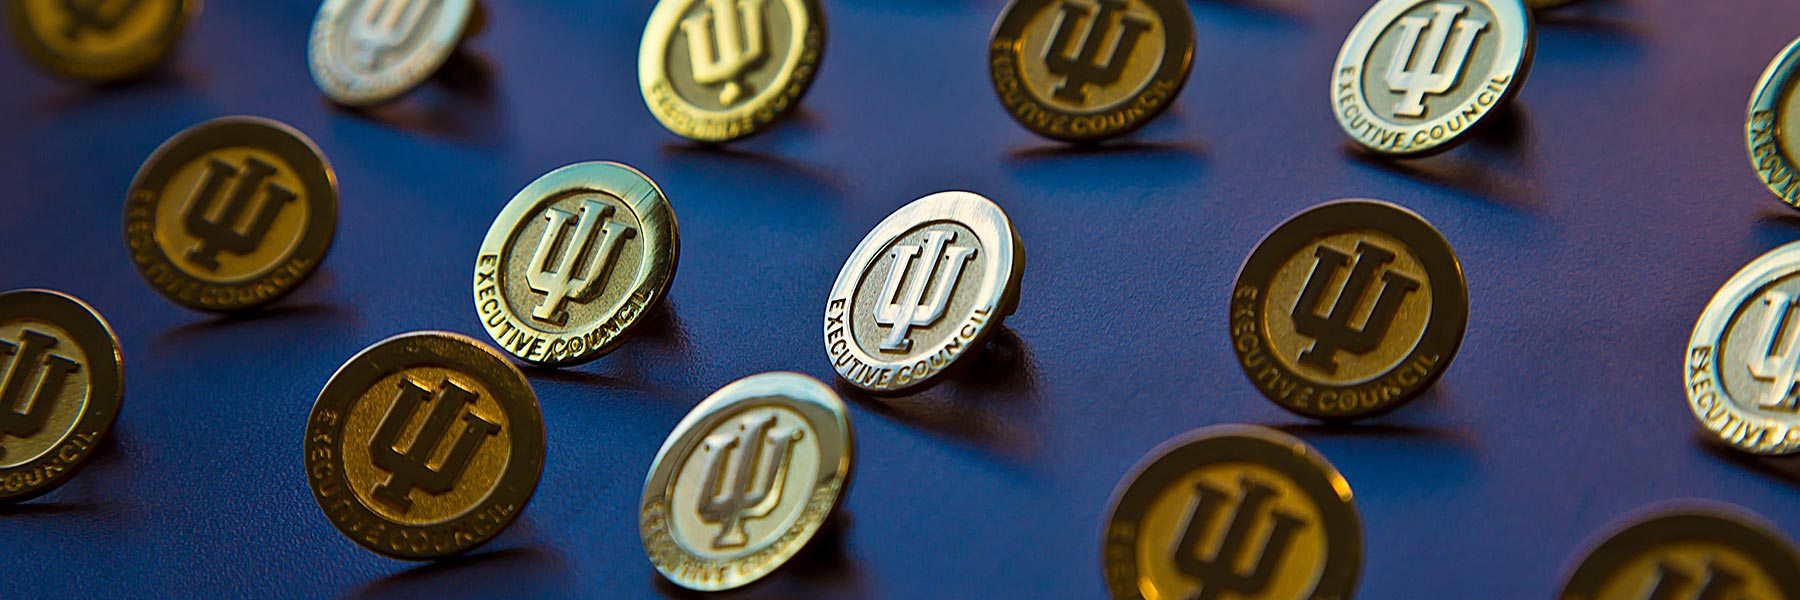 Gold IU Executive Council pins on a blue background